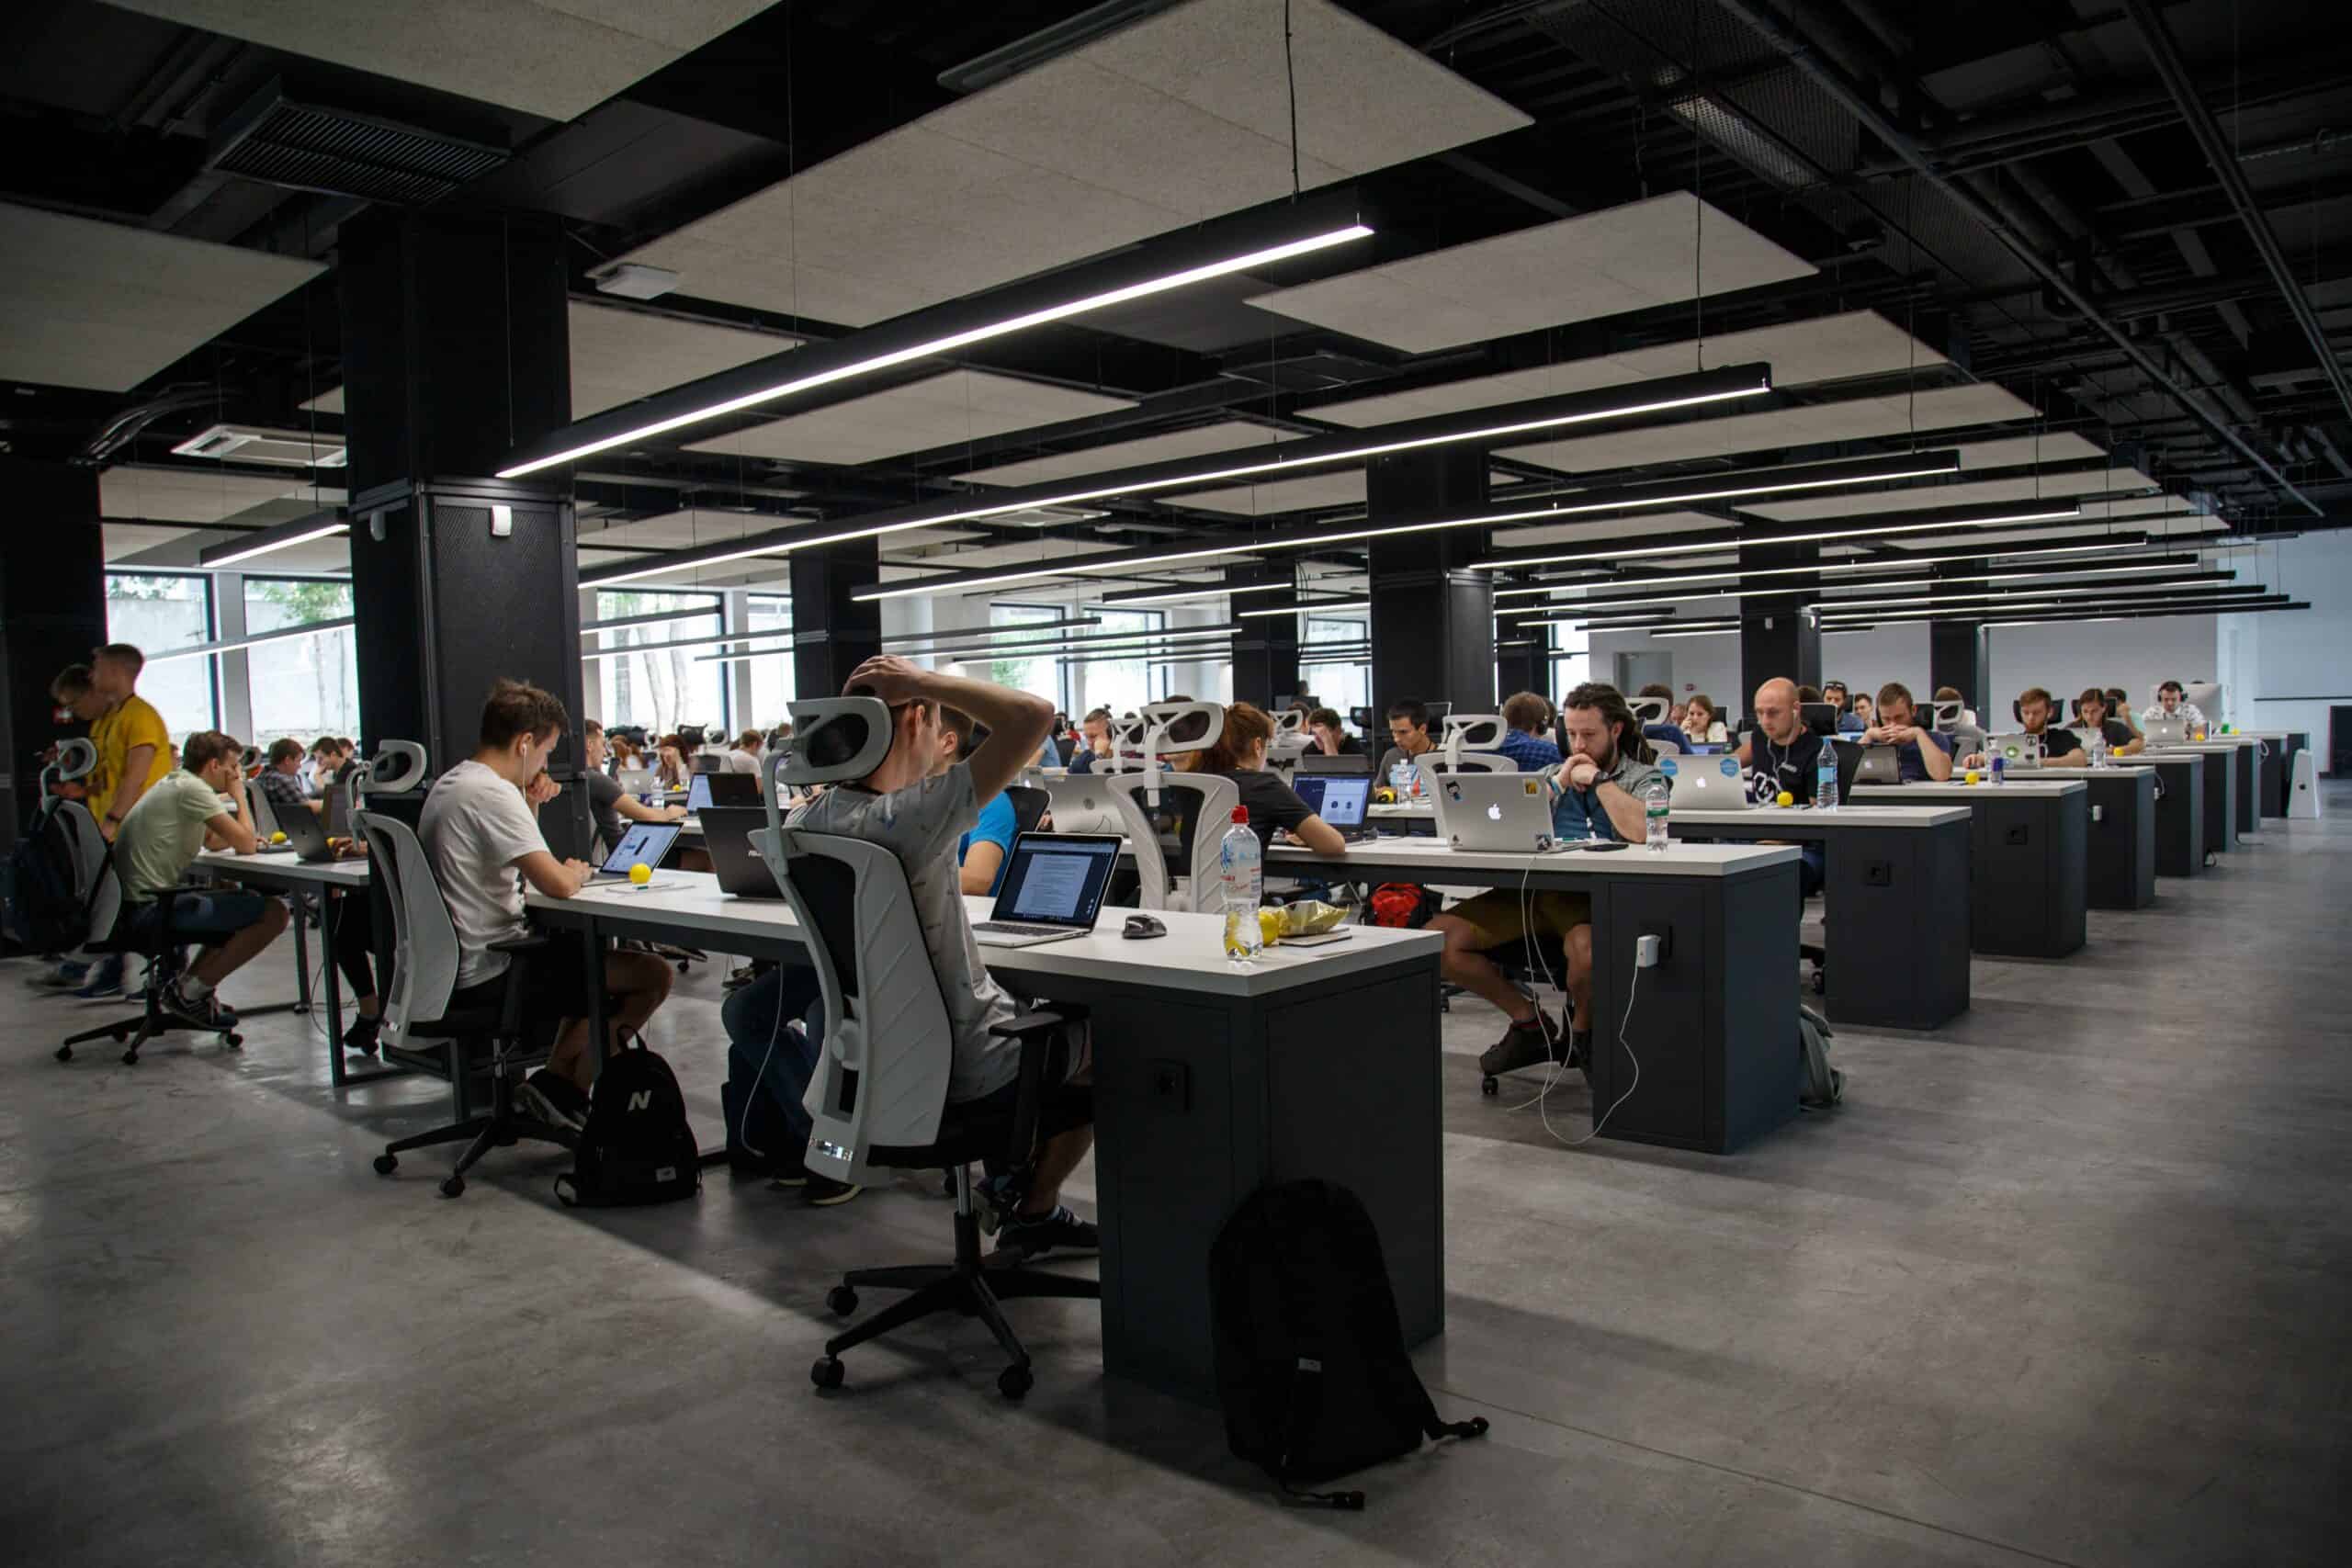 People working in an open office setting